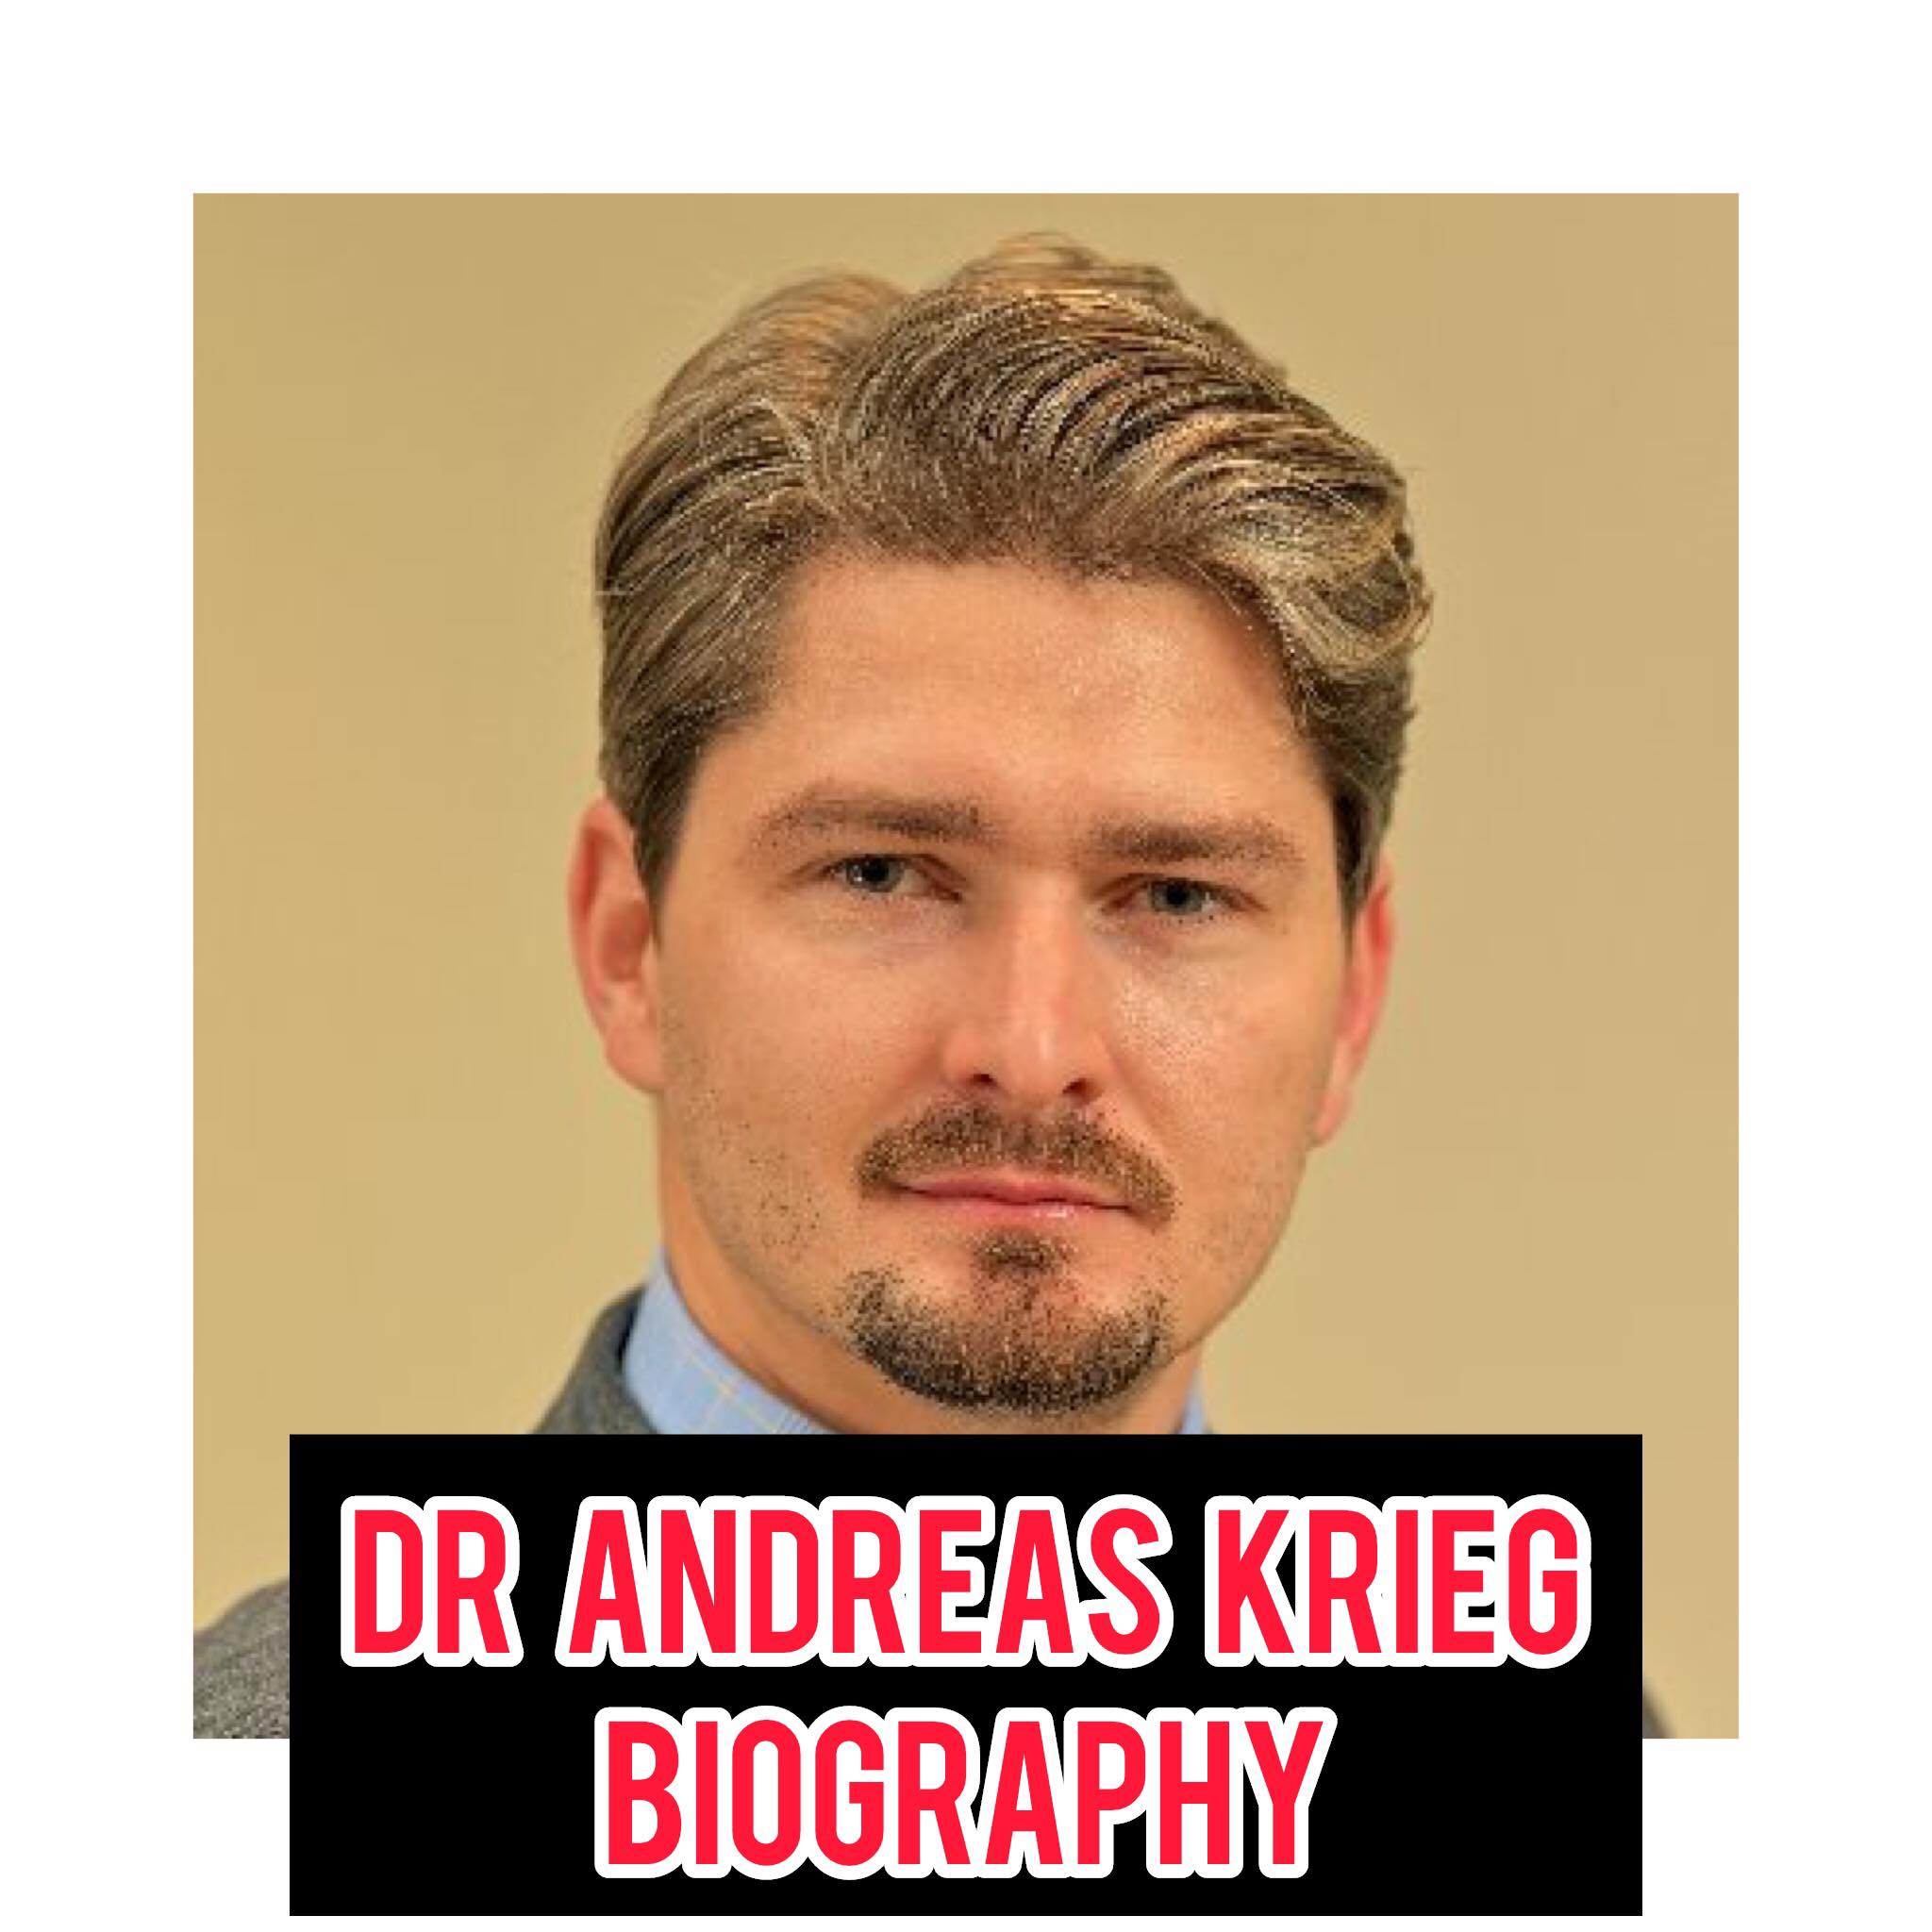 Dr Andreas Krieg Biography